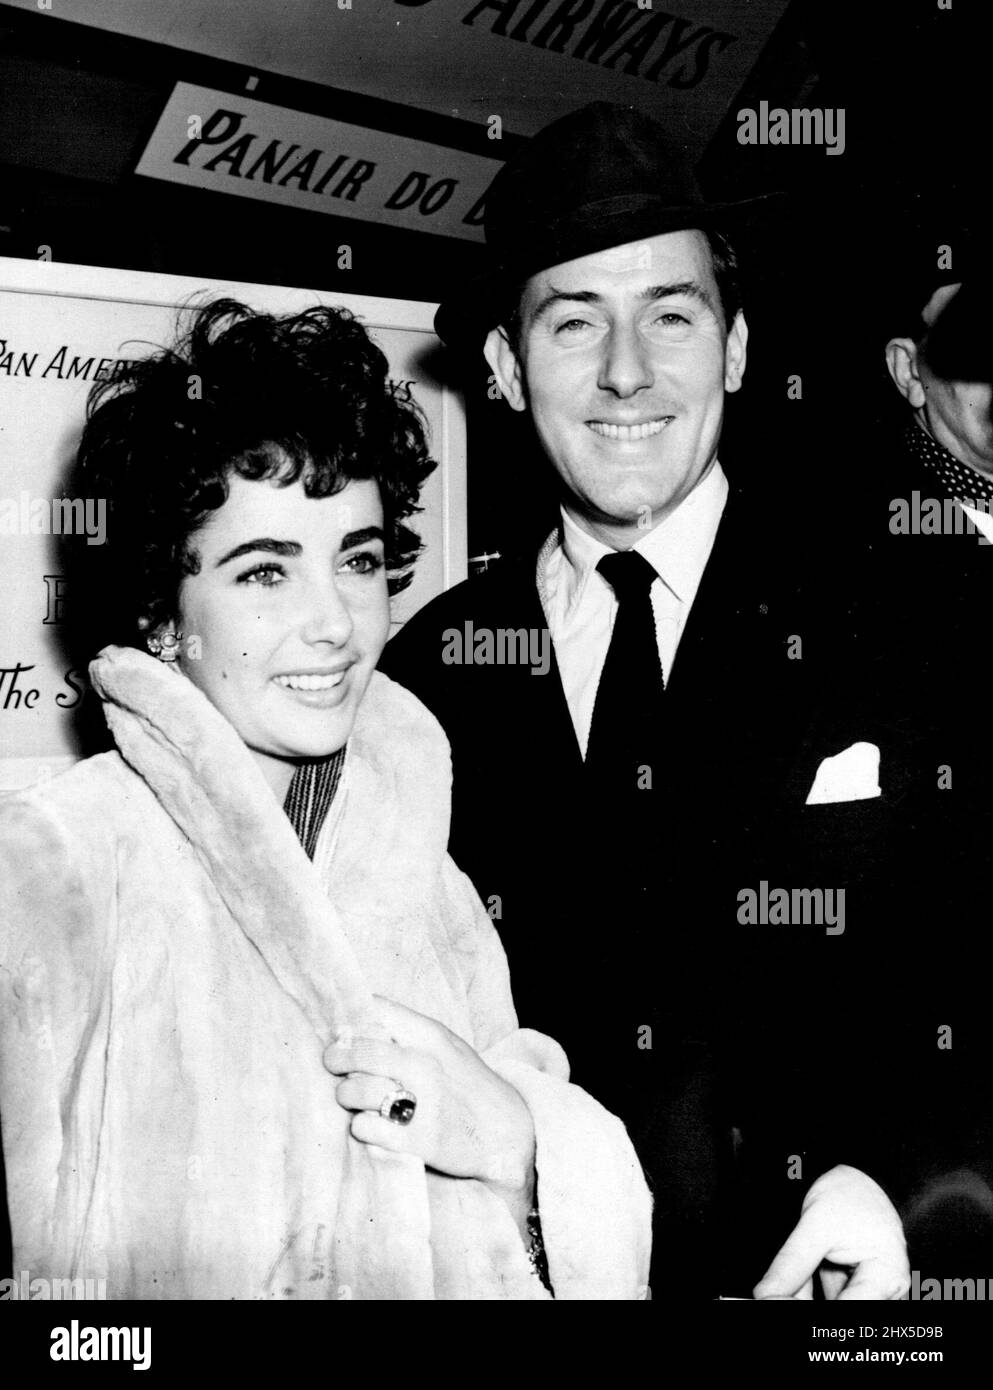 Elizabeth Taylor Here To Wed Michael Wilding, 20 Years Her Senior -- The couple at London airport after Elizabeth Taylor's arrival late last night. Elizabeth is wearing the engagement ring she had to buy herself because Wilding had no dollars. But her has bought her a 'simple English wedding ring', Wilding said last night. It is made of platinum. 19-year-old English film star Elizabeth Taylor, English-born but working in Hollywood, arrived last night at London airport after a two-hour delay through storms. February 20, 1952. (Photo by Paul Popper) Stock Photo